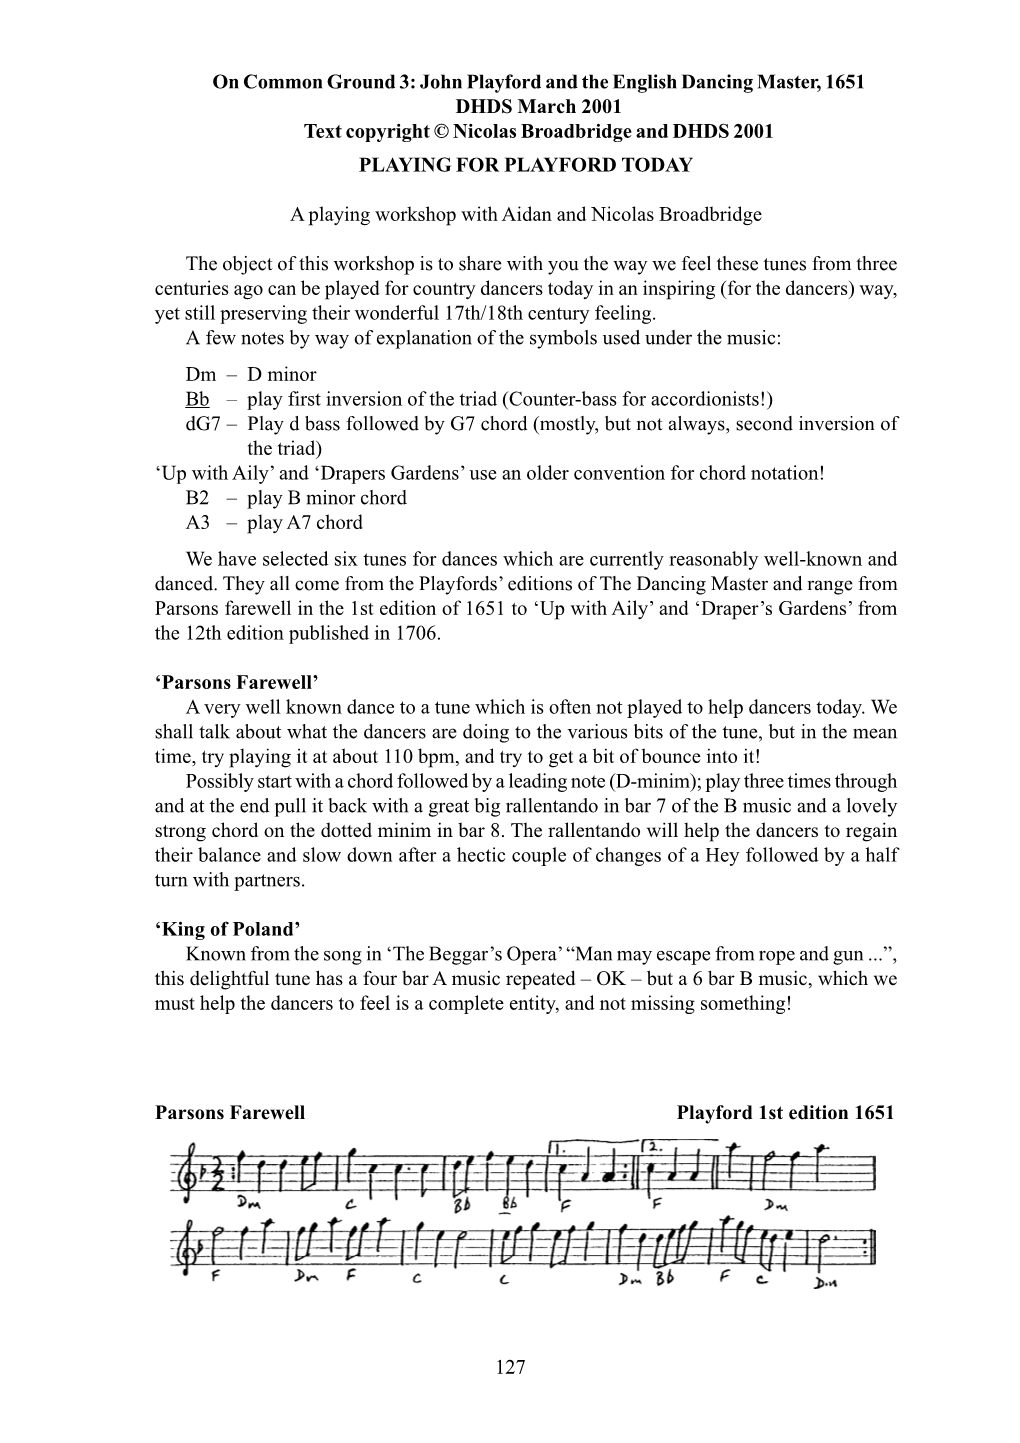 On Common Ground 3: John Playford and the English Dancing Master, 1651 DHDS March 2001 Text Copyright © Nicolas Broadbridge and DHDS 2001 PLAYING for PLAYFORD TODAY